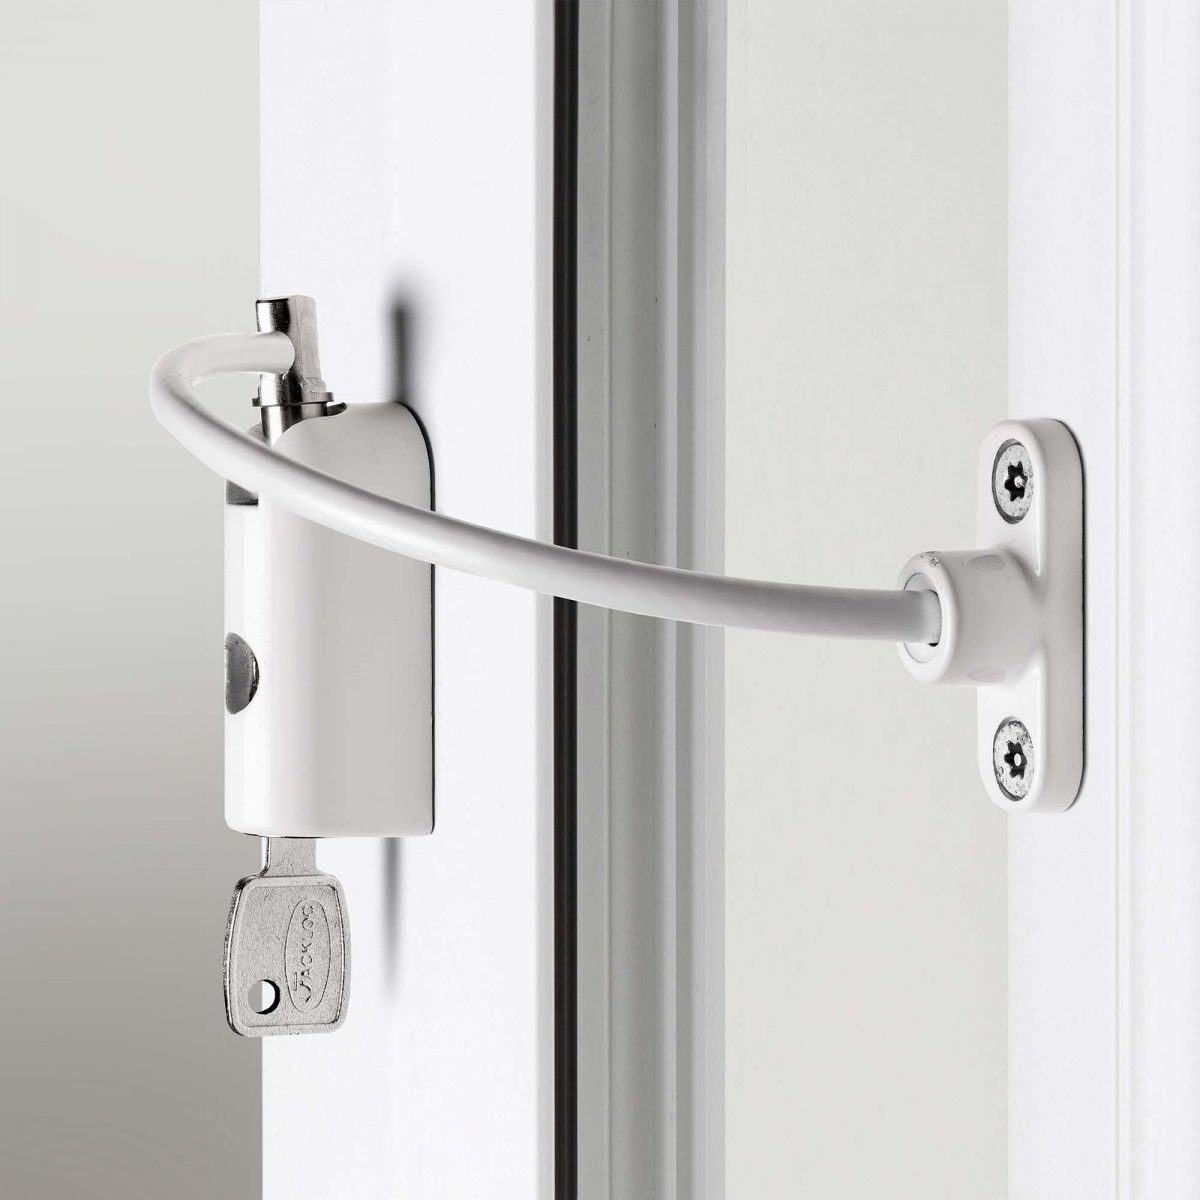 Pro2 by Jackloc cable window restrictor